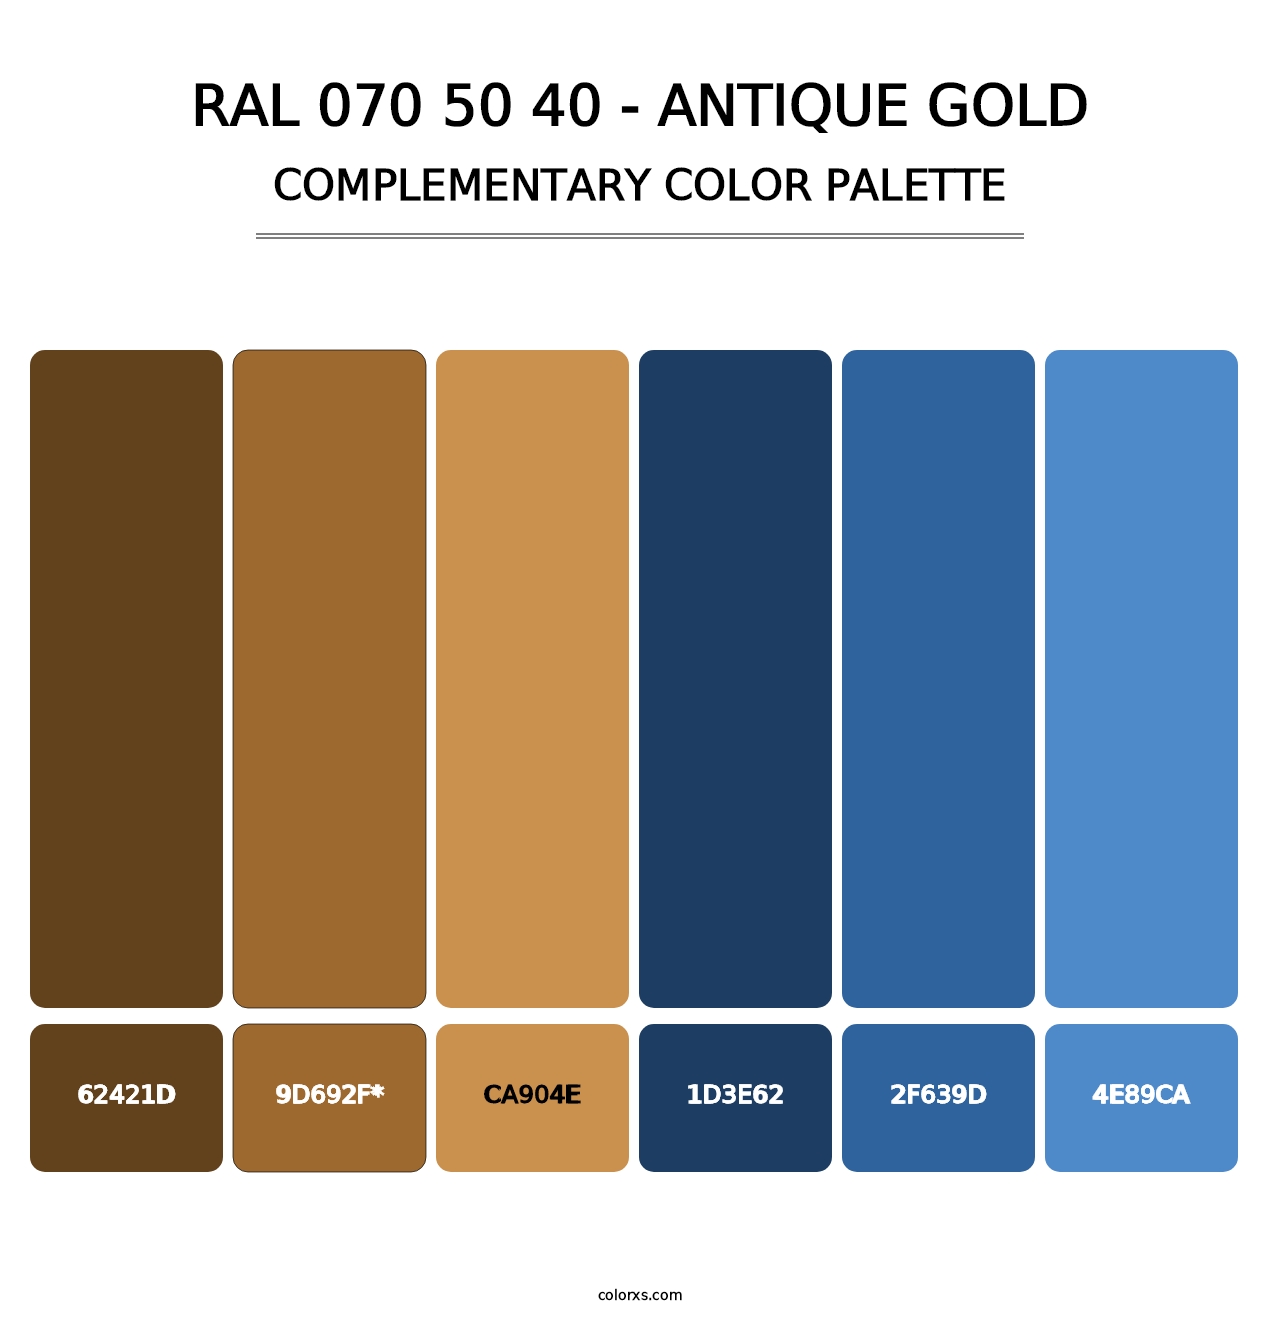 RAL 070 50 40 - Antique Gold - Complementary Color Palette